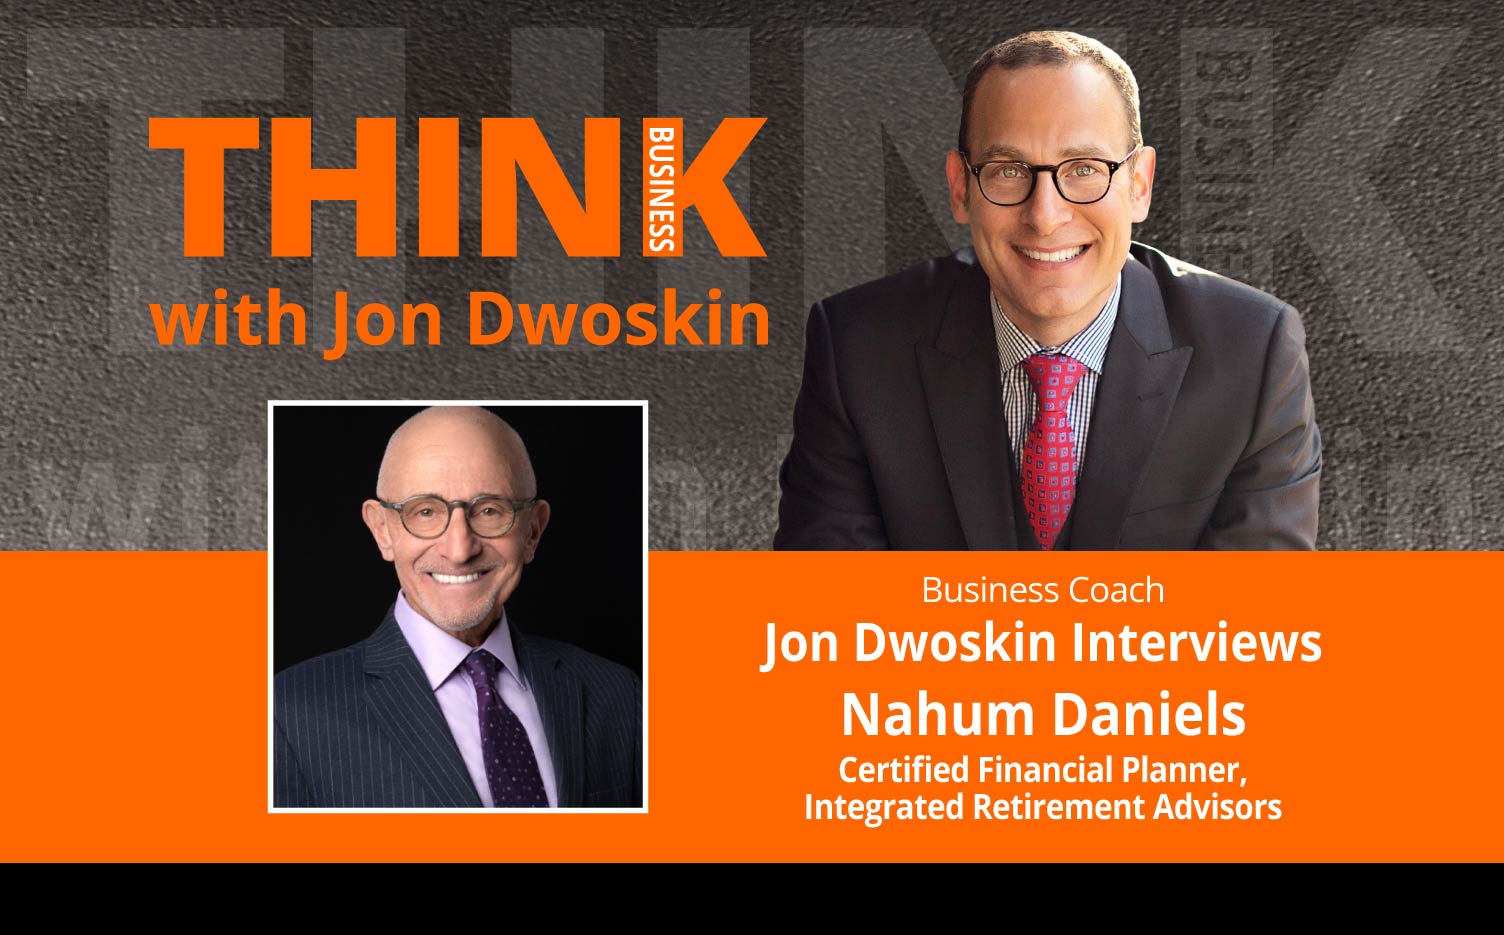 Nahum Daniels Joins Jon Dwoskin On His “Think Business” Podcast